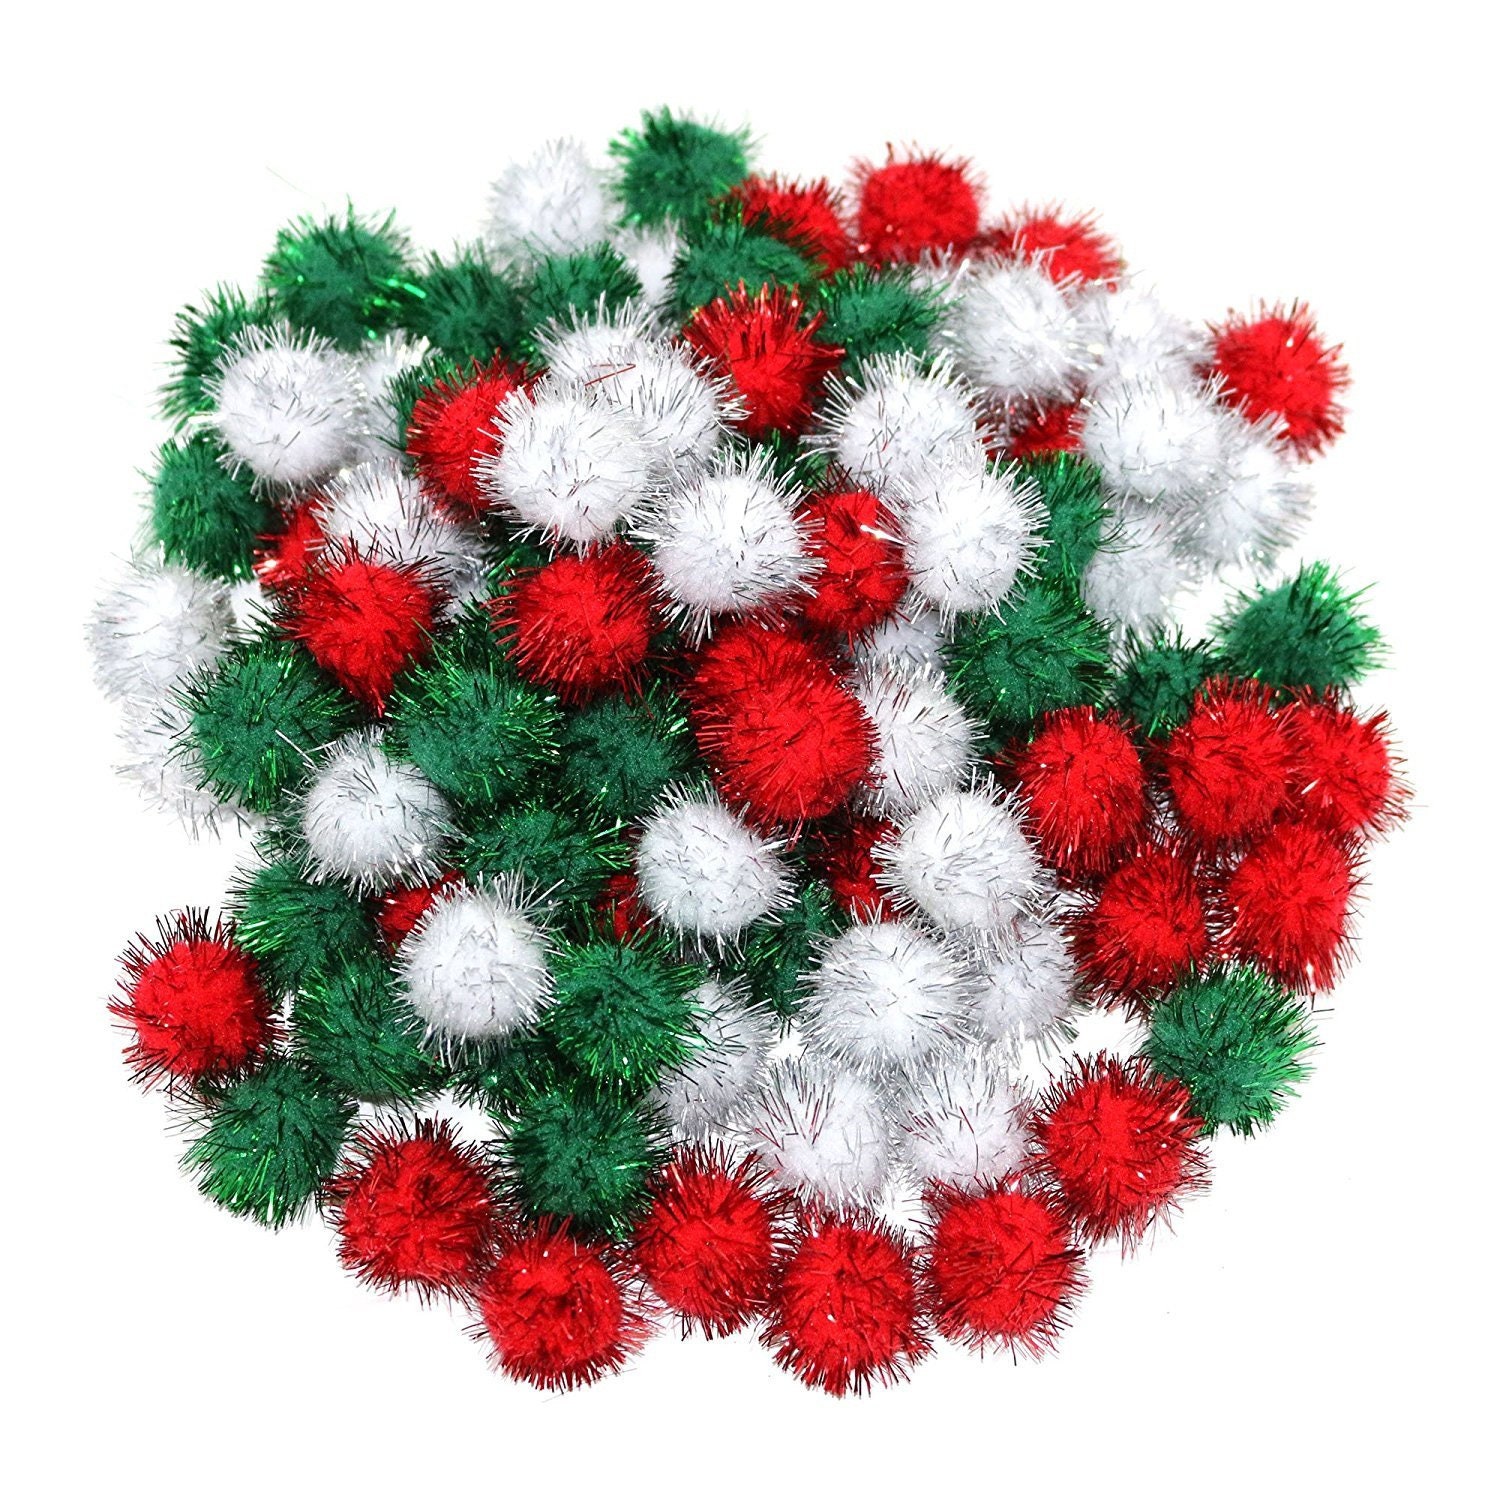 Shappy 100 Pieces Christmas Pom Poms Glitter Pom Decor for Arts Crafts DIY, Green, White and Red (25 mm)